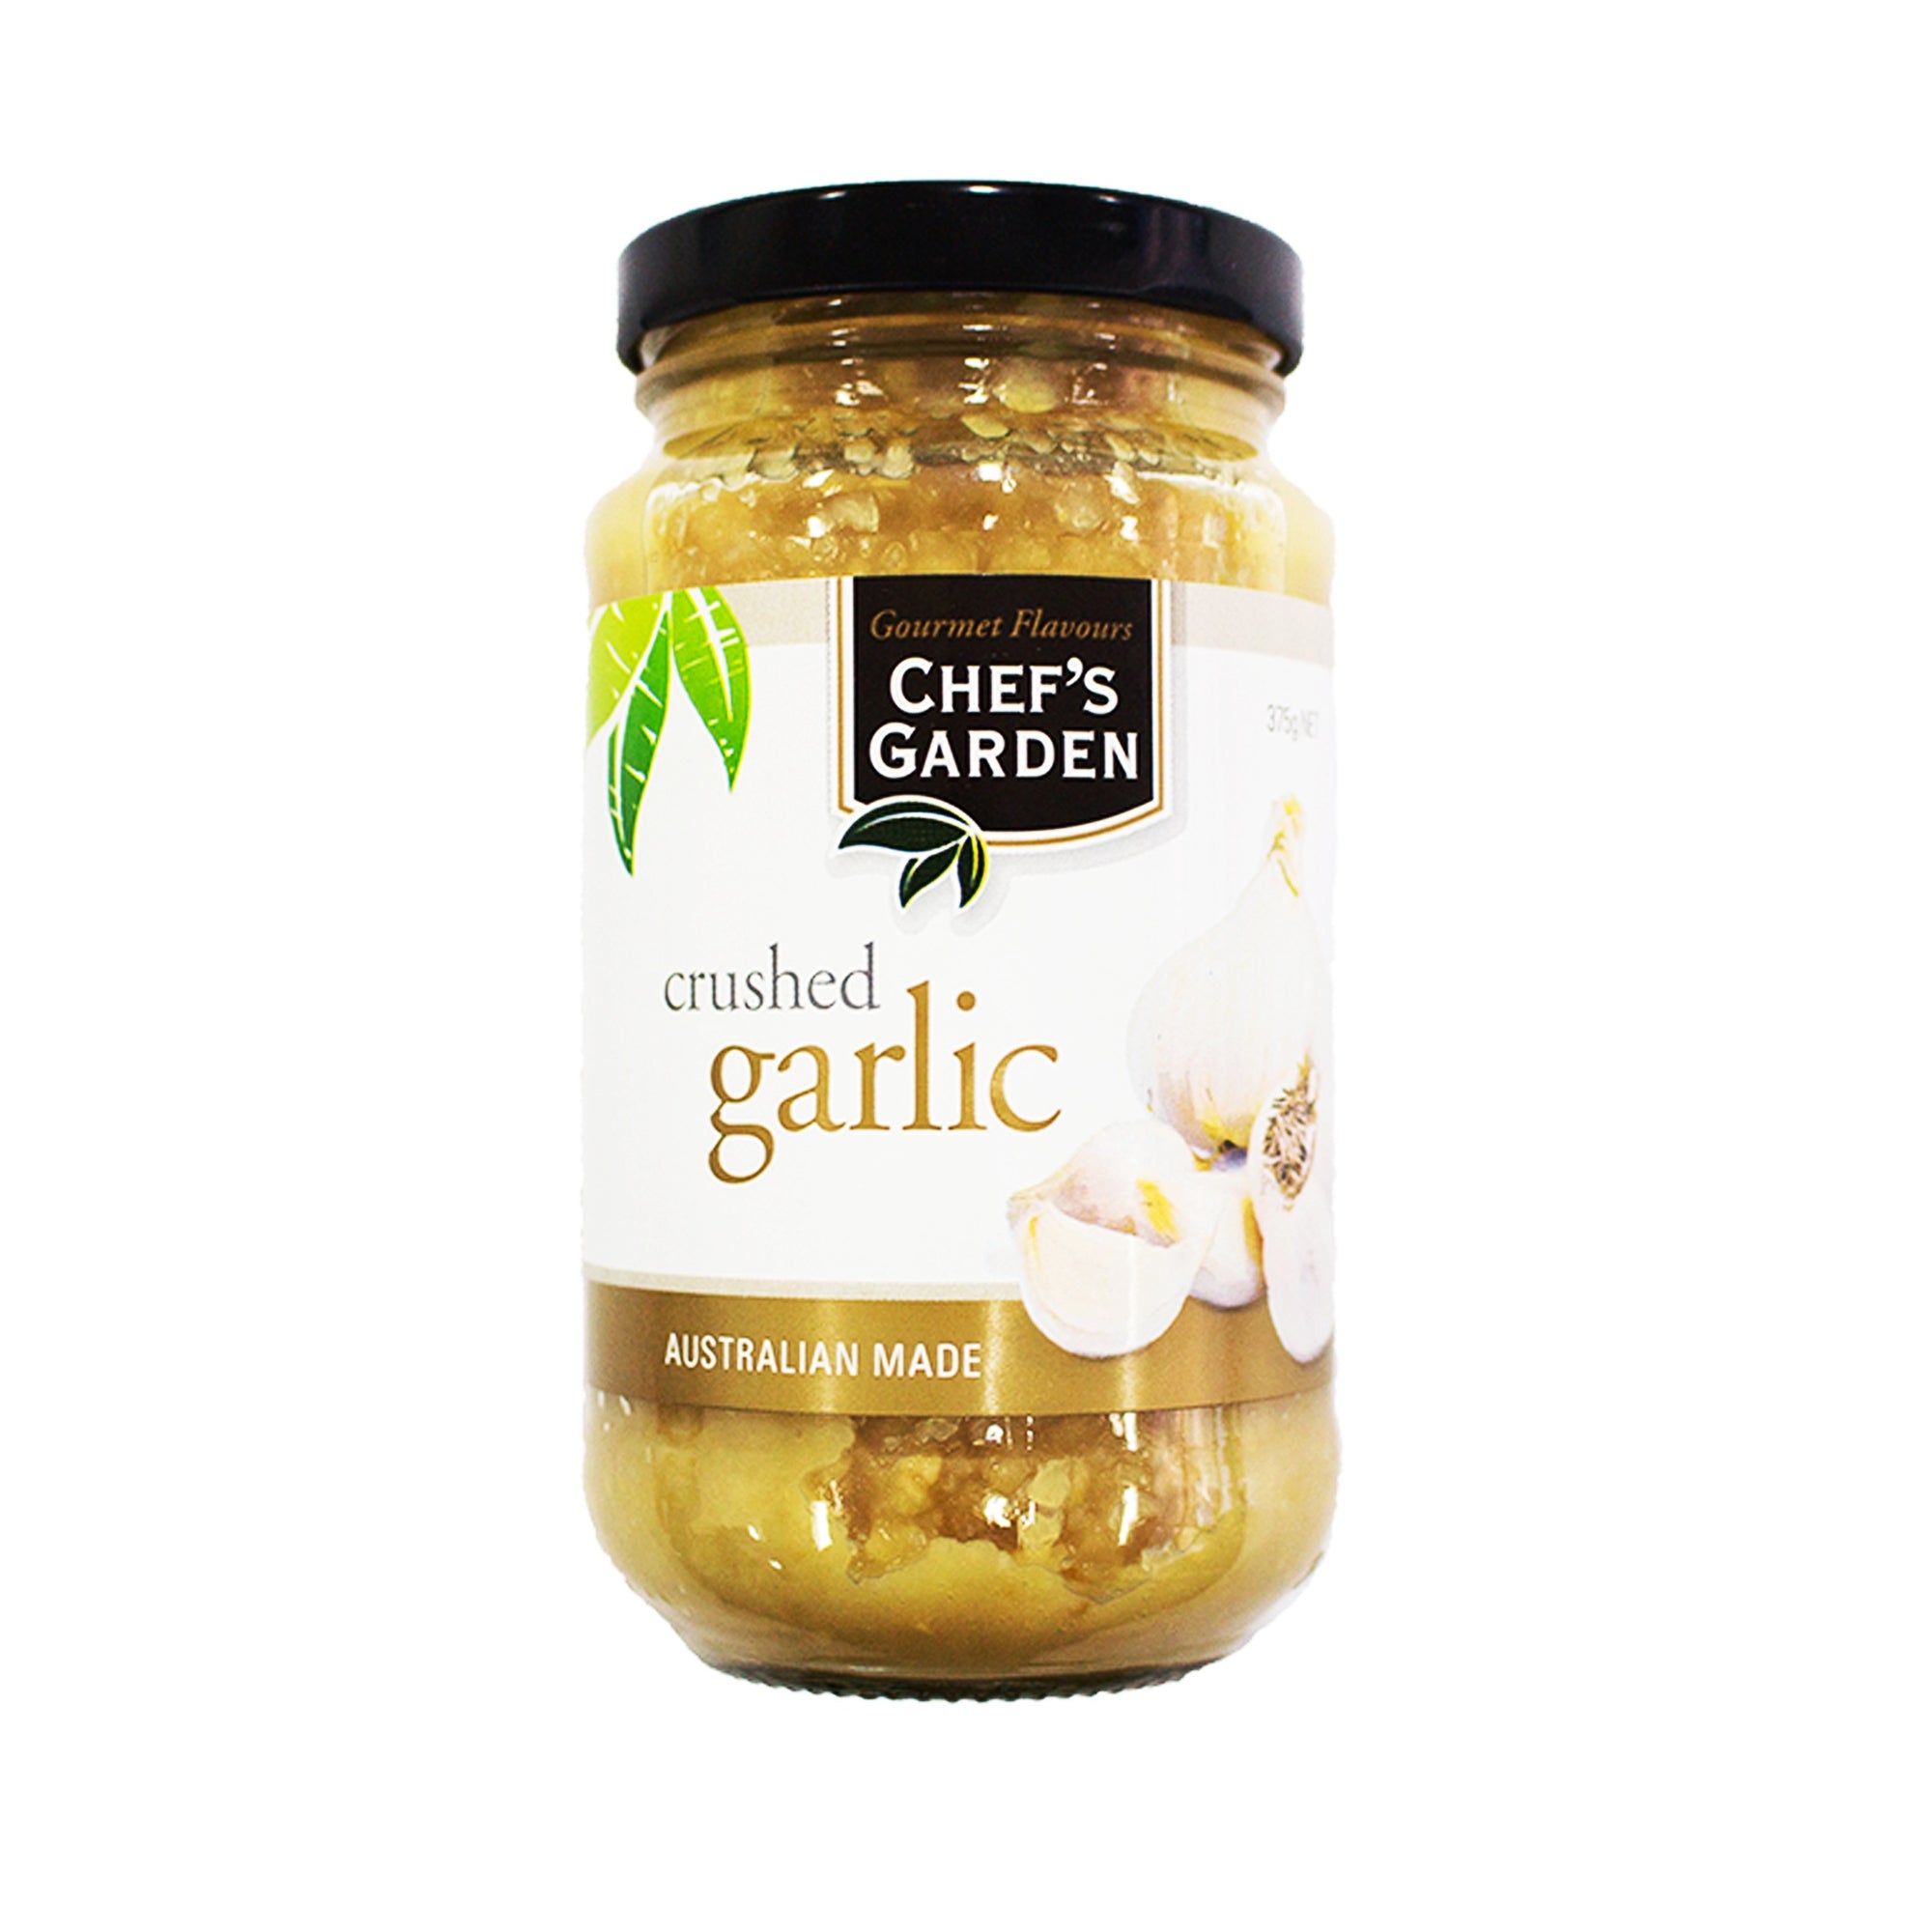 MasterFoods Finely Crushed Garlic 170g